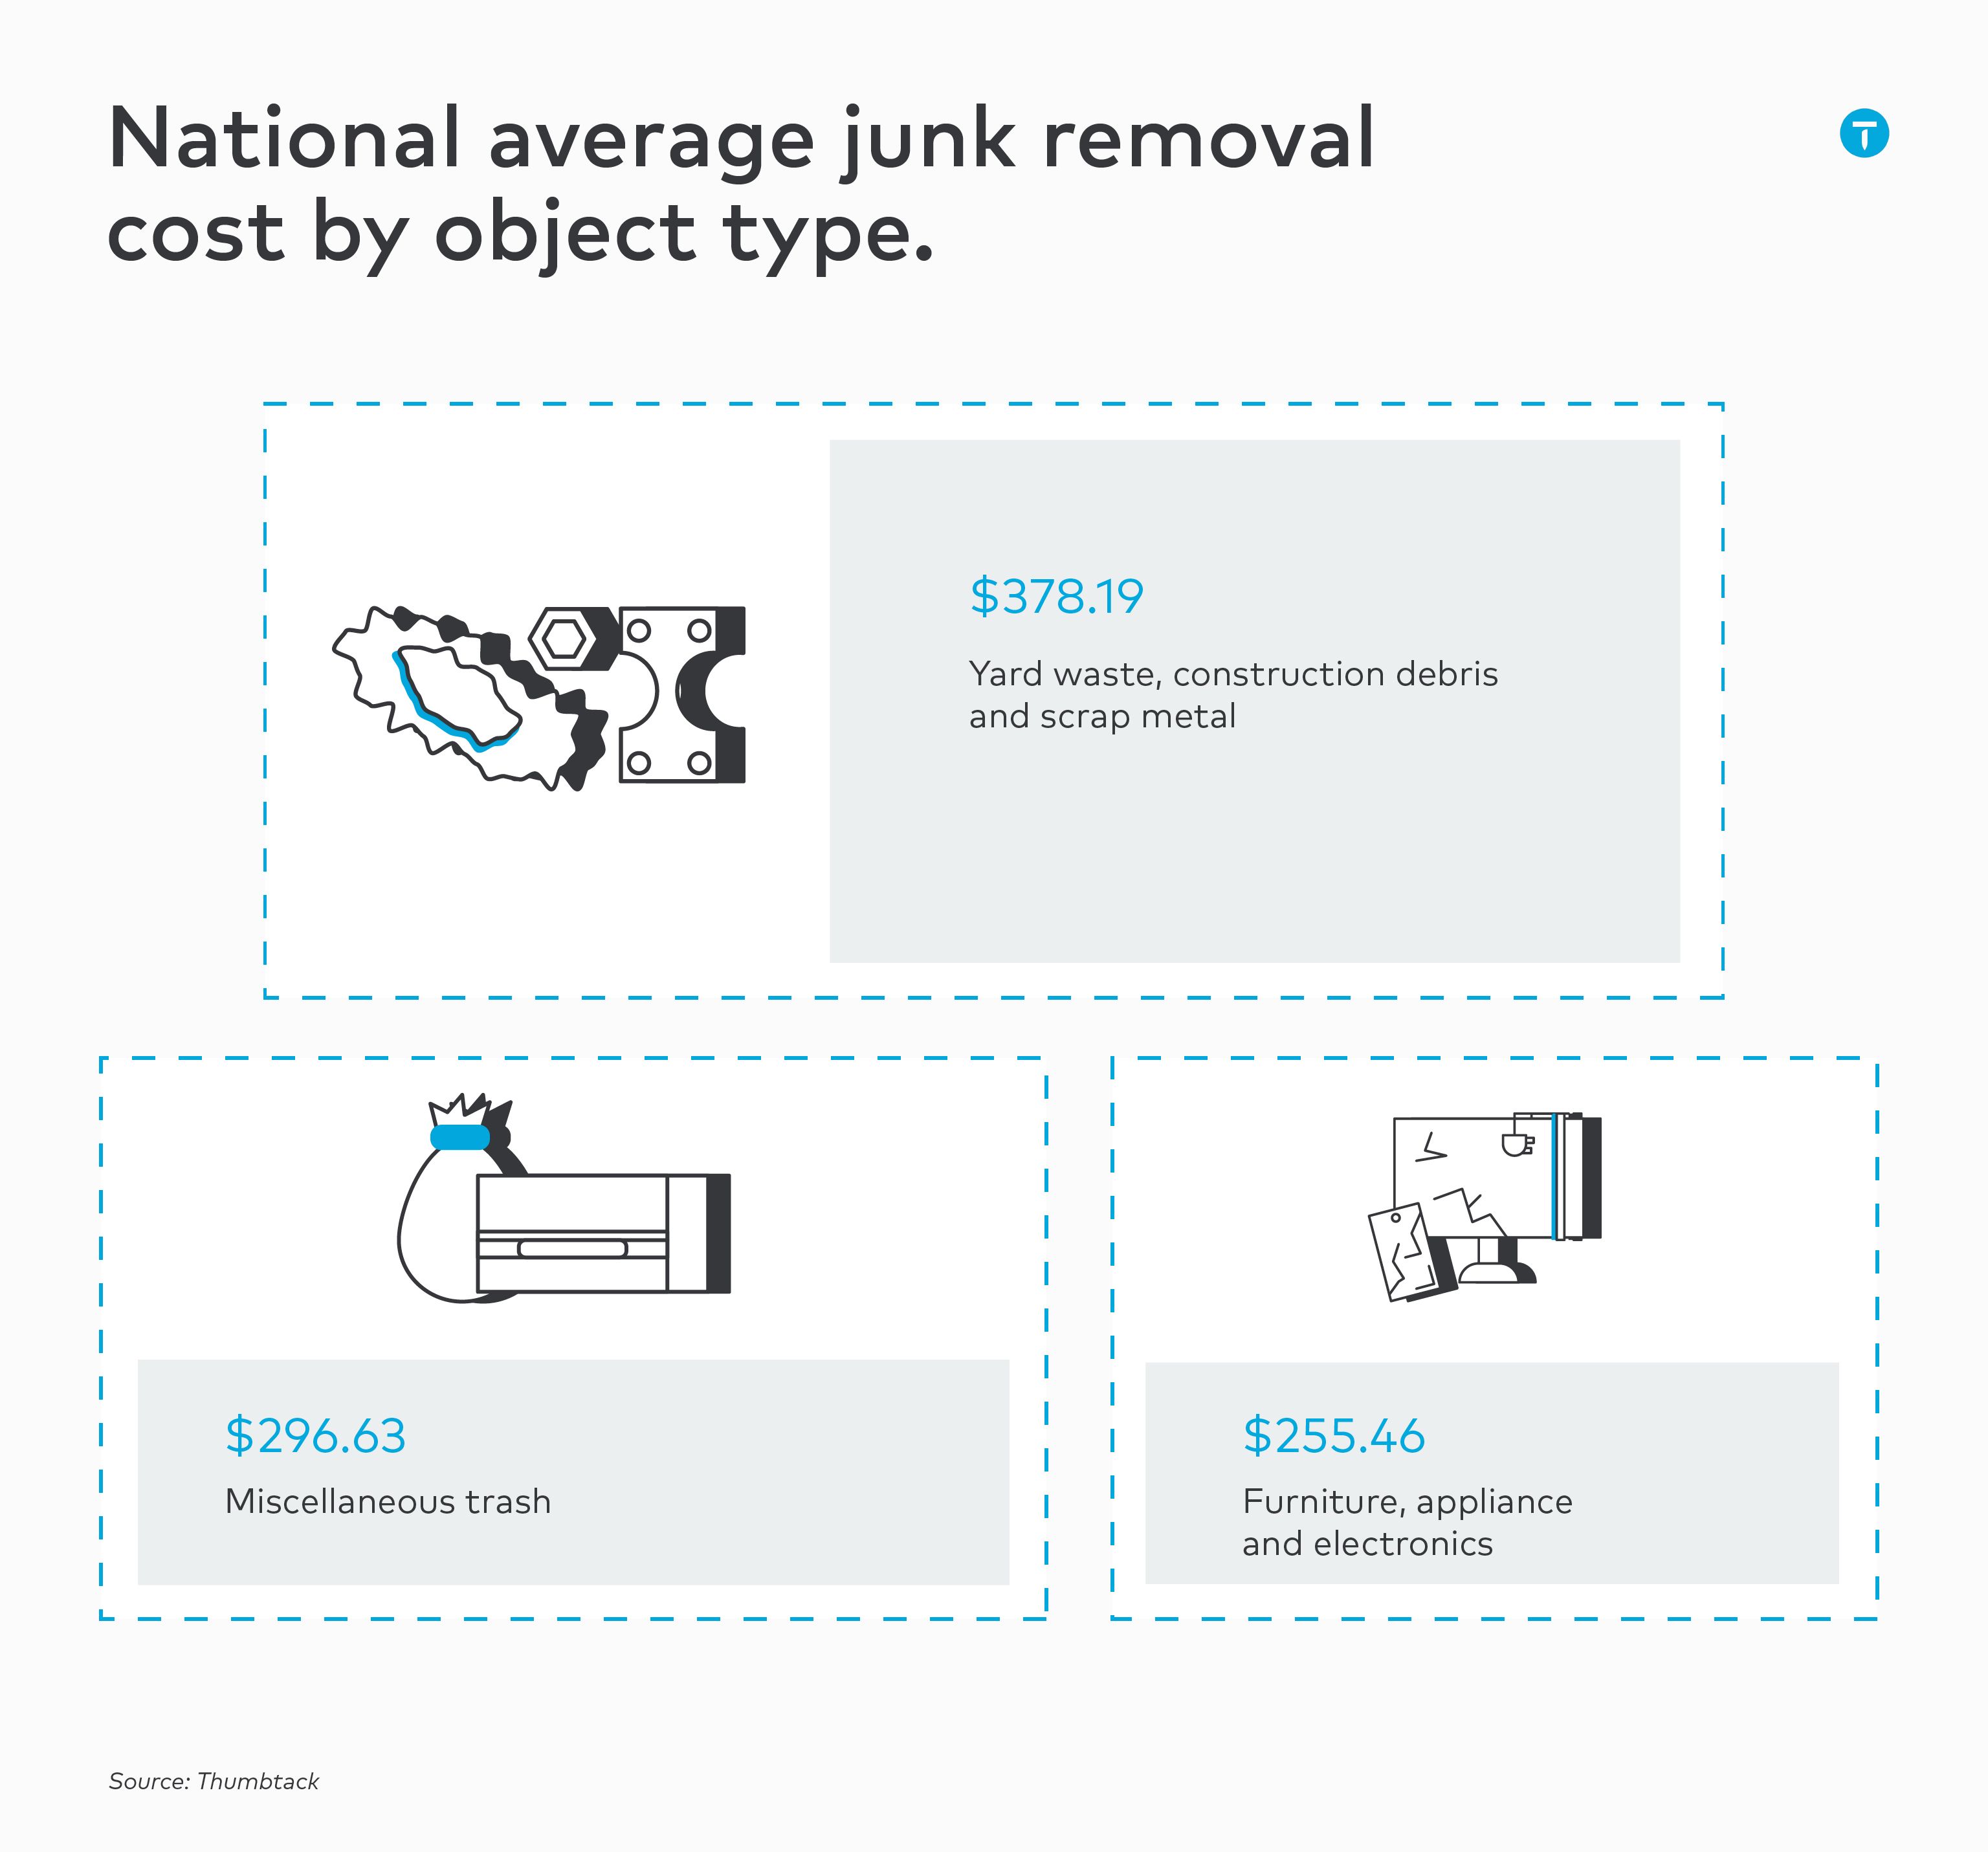 junk removal costs by object type